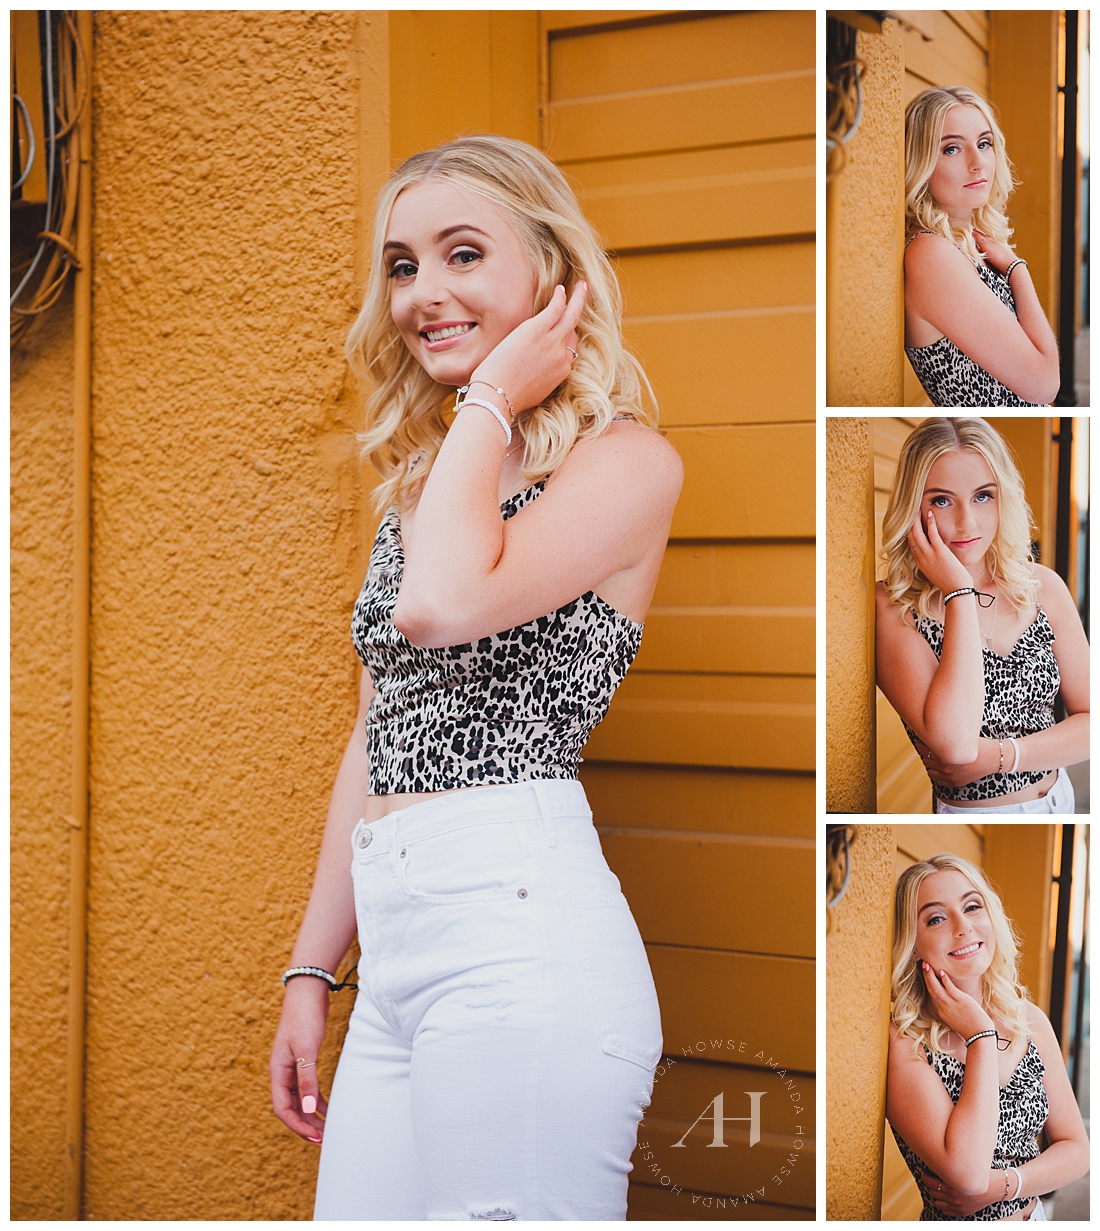 Modern Senior Portraits with Colorful Yellow Wall | Urban Senior Portraits with Fun Outfit Inspiration, Pose Ideas for High School Senior Girls, How to Style a Summer Portrait Session | Photographed by the Best Tacoma Senior Portrait Photographer Amanda Howse